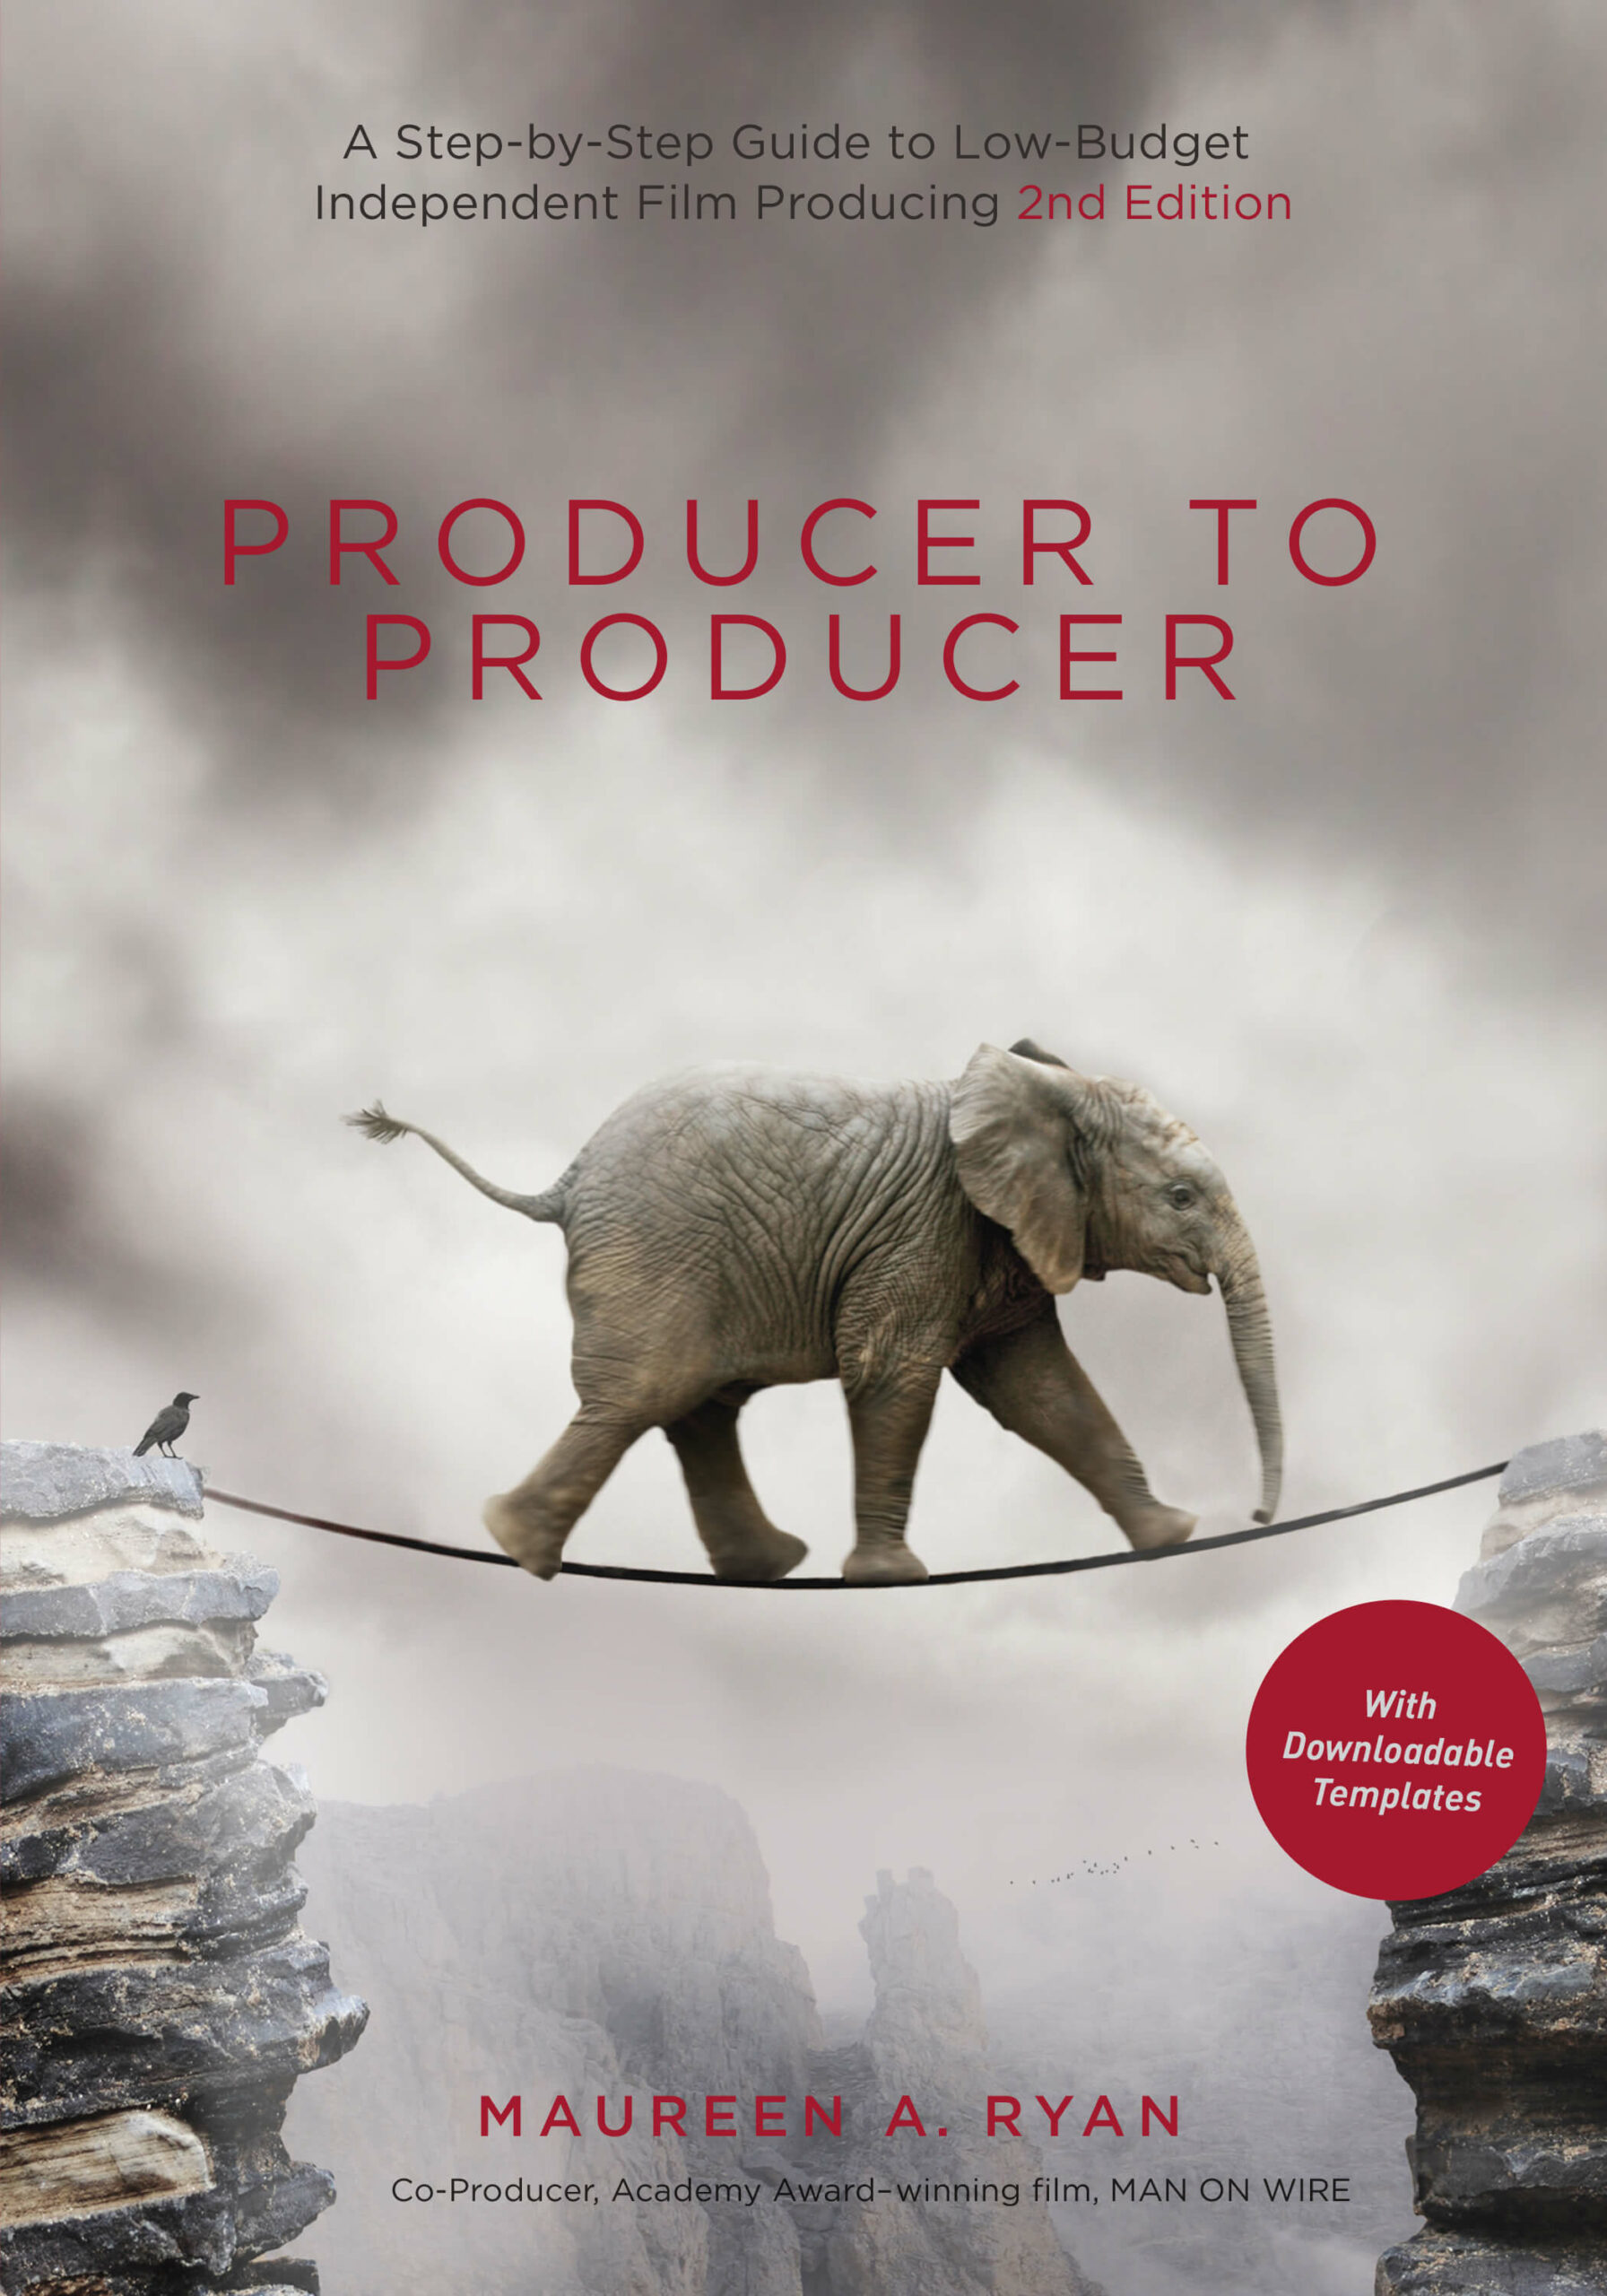 Producer to Producer: A Step-by-Step Guide to Low-Budget Independent Film Producing 2nd Edition